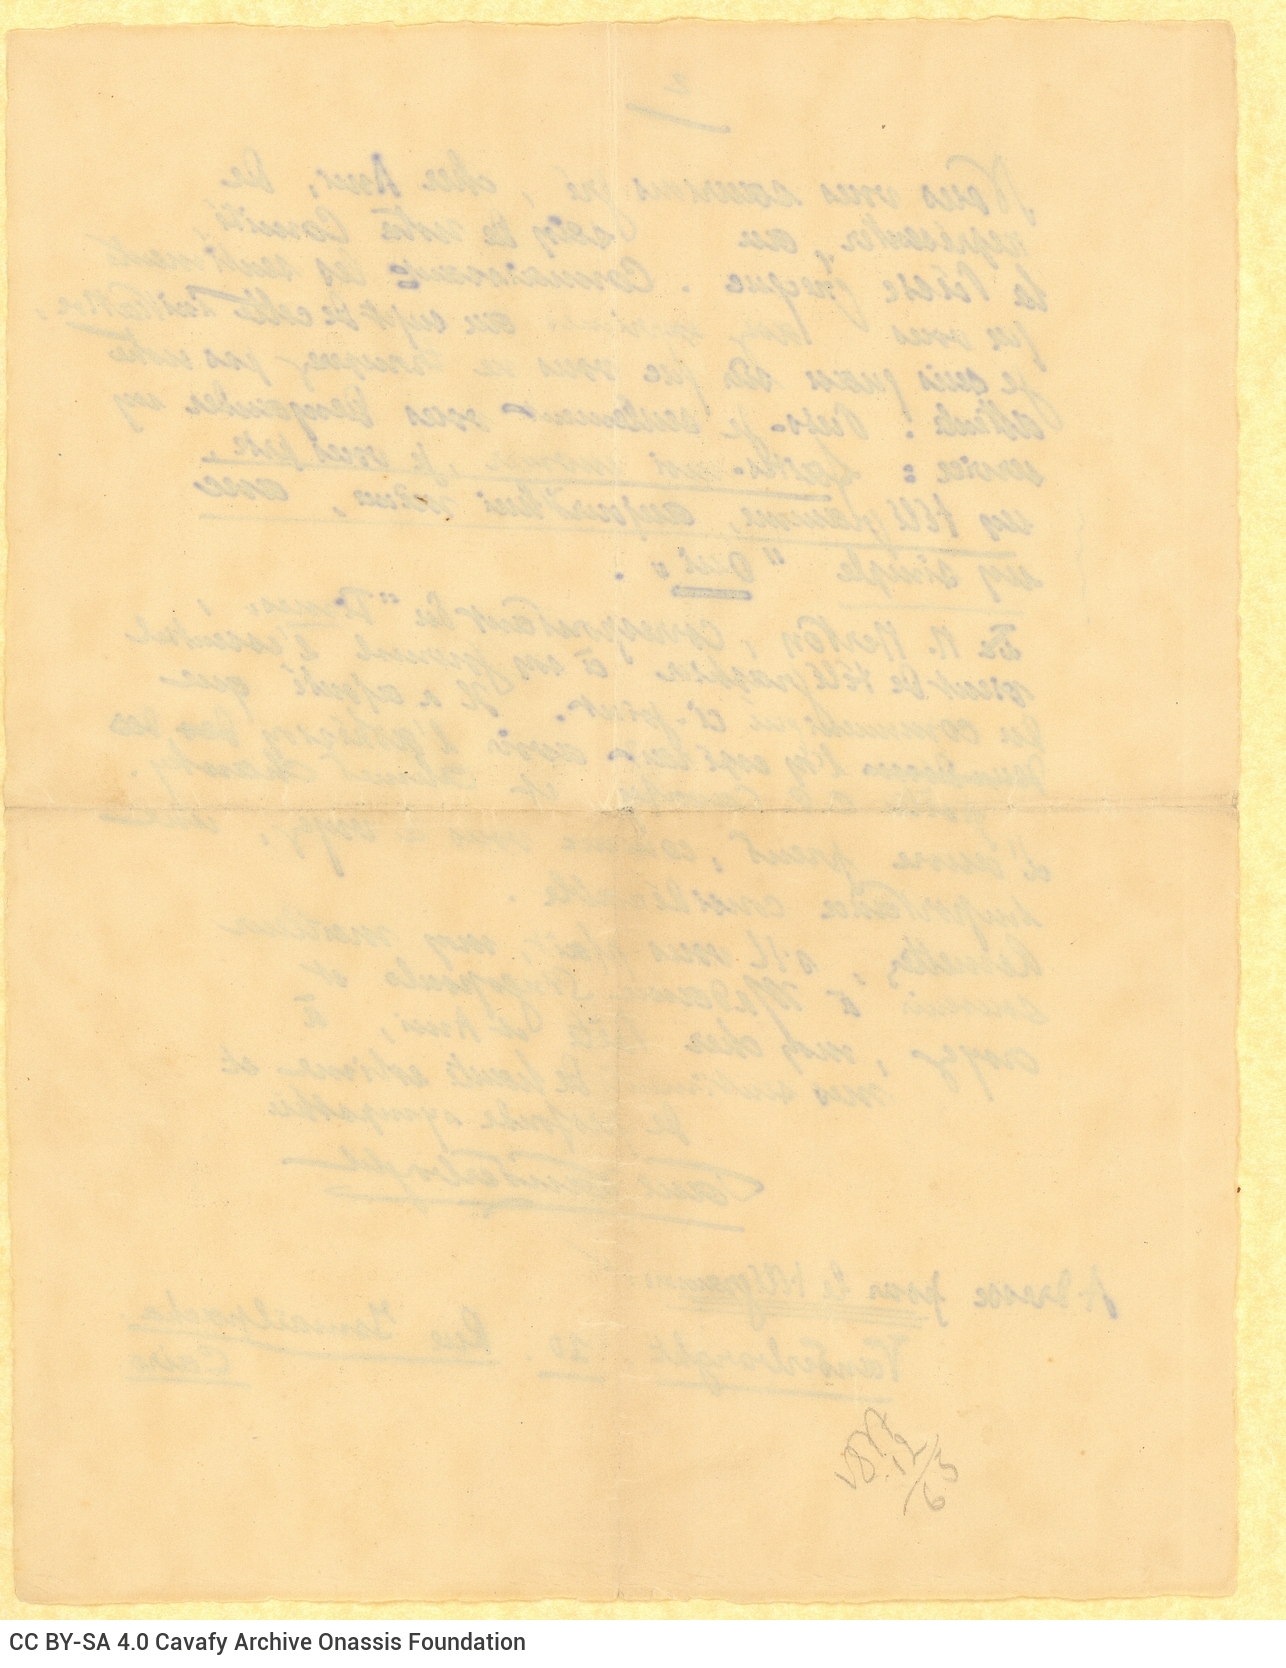 Handwritten letter by Paul Vanderborght to Cavafy on the rectos of two sheets. Blank versos. The second page is numbered. The